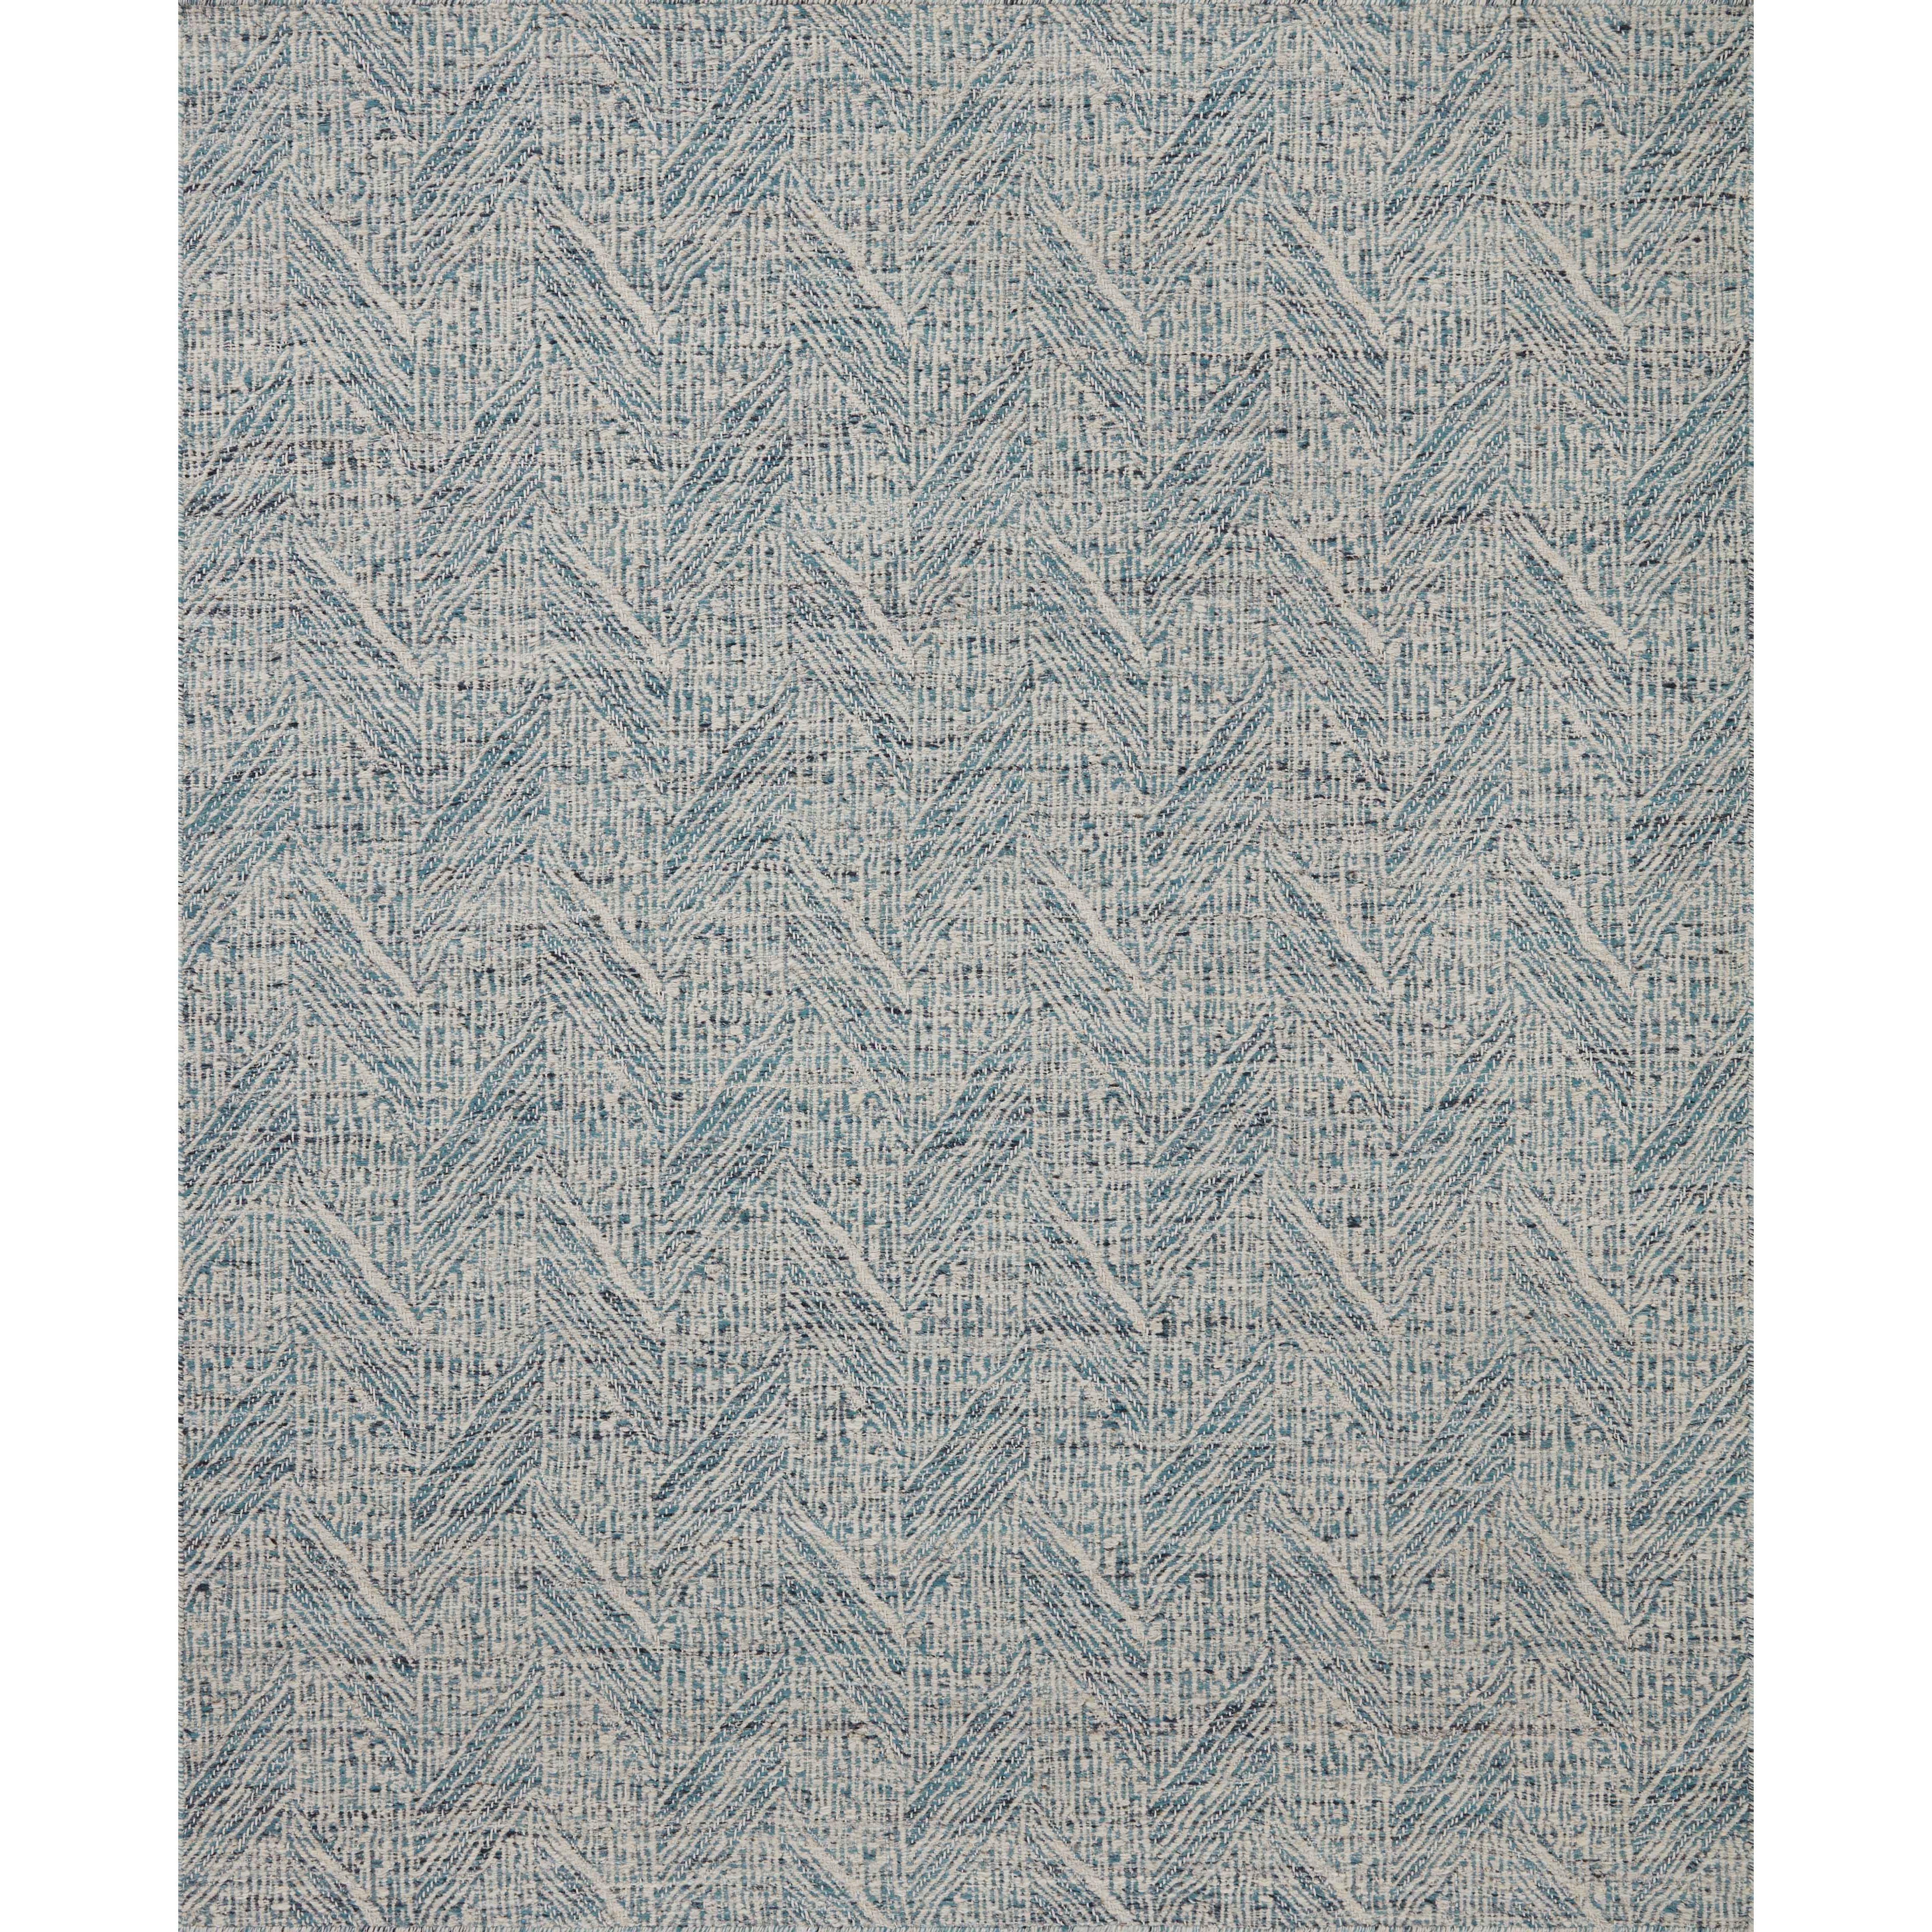 The Raven Blue / Ivory Rug is intricately handwoven with delicate, fine yarns that amplify the rug's layered and dimensional geometric design. While the rug itself is thick and sturdy, the colors and patterns have a casual lightness that can work in many spaces, from busy living rooms to serene bedrooms. Amethyst Home provides interior design, new construction, custom furniture, and area rugs in the Laguna Beach metro area.